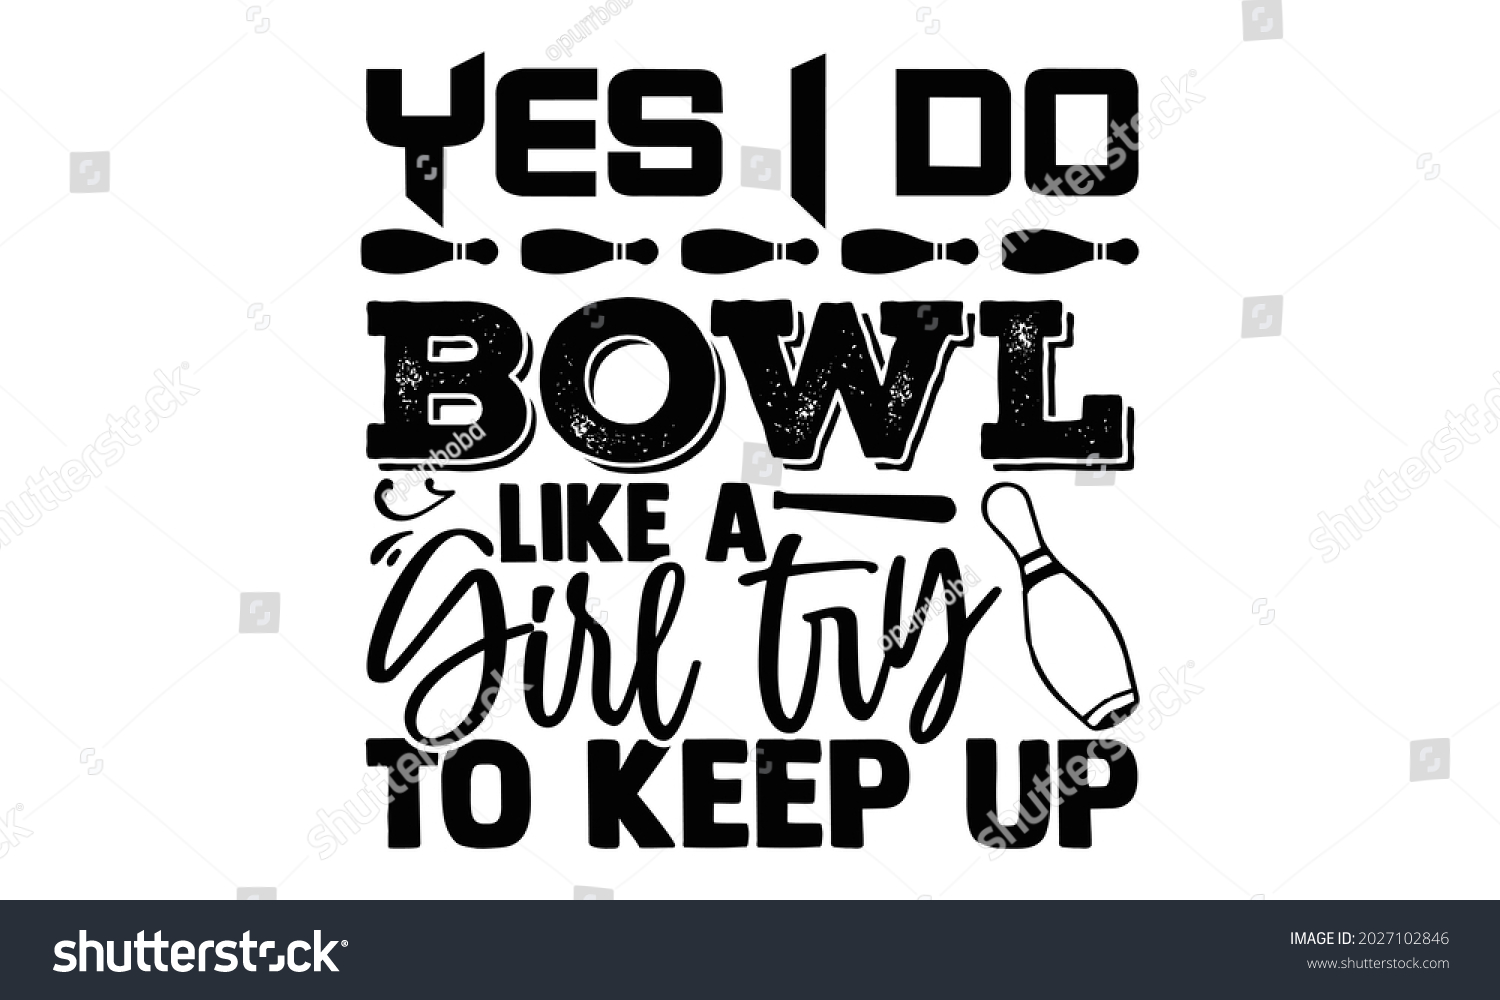 SVG of Yes I do bowl like a girl try to keep up- Bowling t shirts design, Hand drawn lettering phrase, Calligraphy t shirt design, Isolated on white background, svg Files for Cutting Cricut, Silhouette, EPS svg